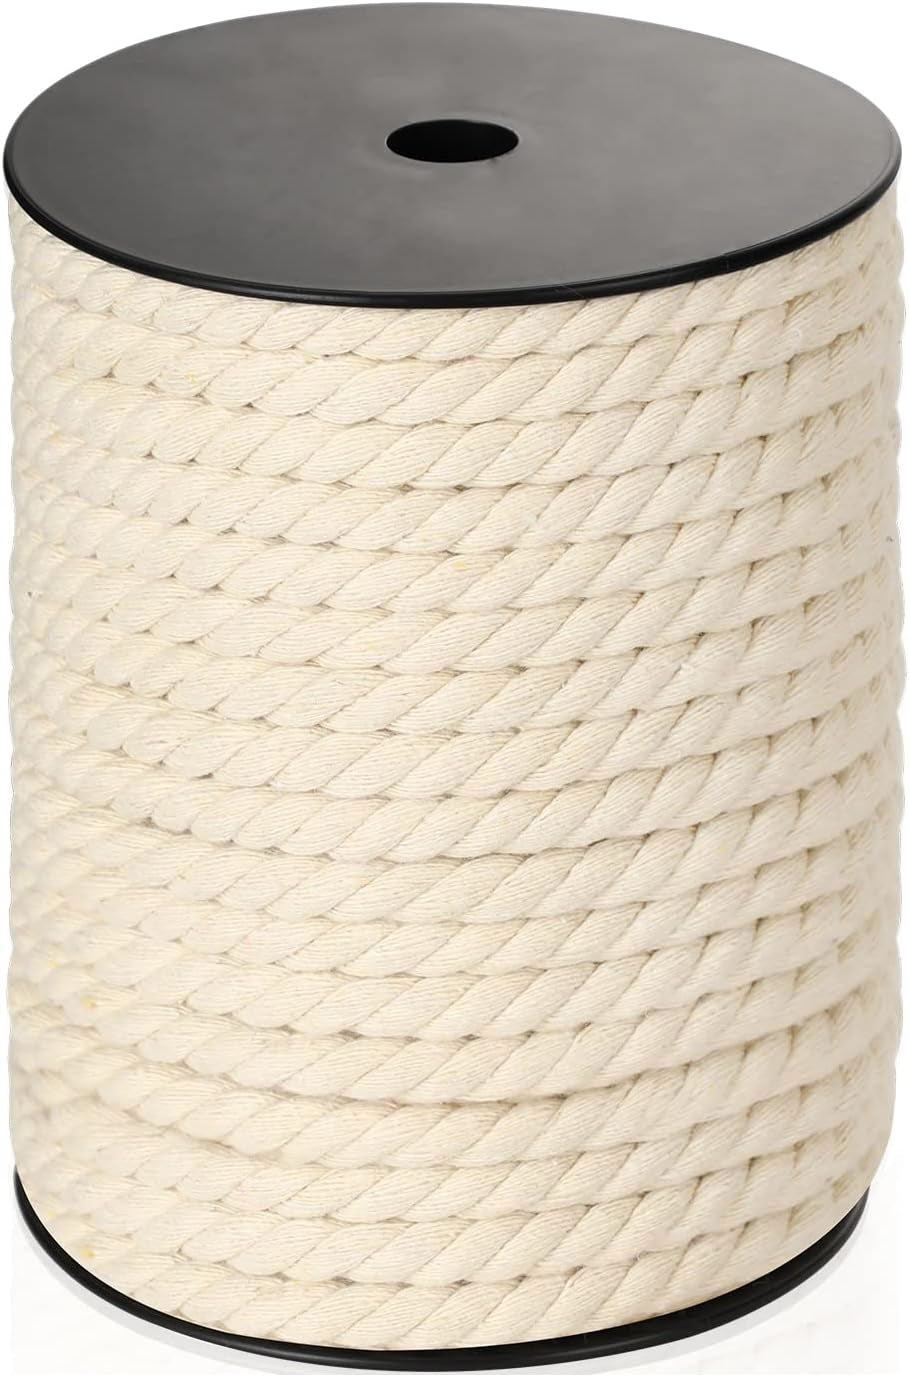 Macrame Cord 3Mm X 328Yards(984Feet), Natural Cotton Macrame Rope - 3 Strands Twisted Macrame Cotton Cord for Wall Hanging, Plant Hangers, Crafts, Gift Wrapping and Wedding Decorations